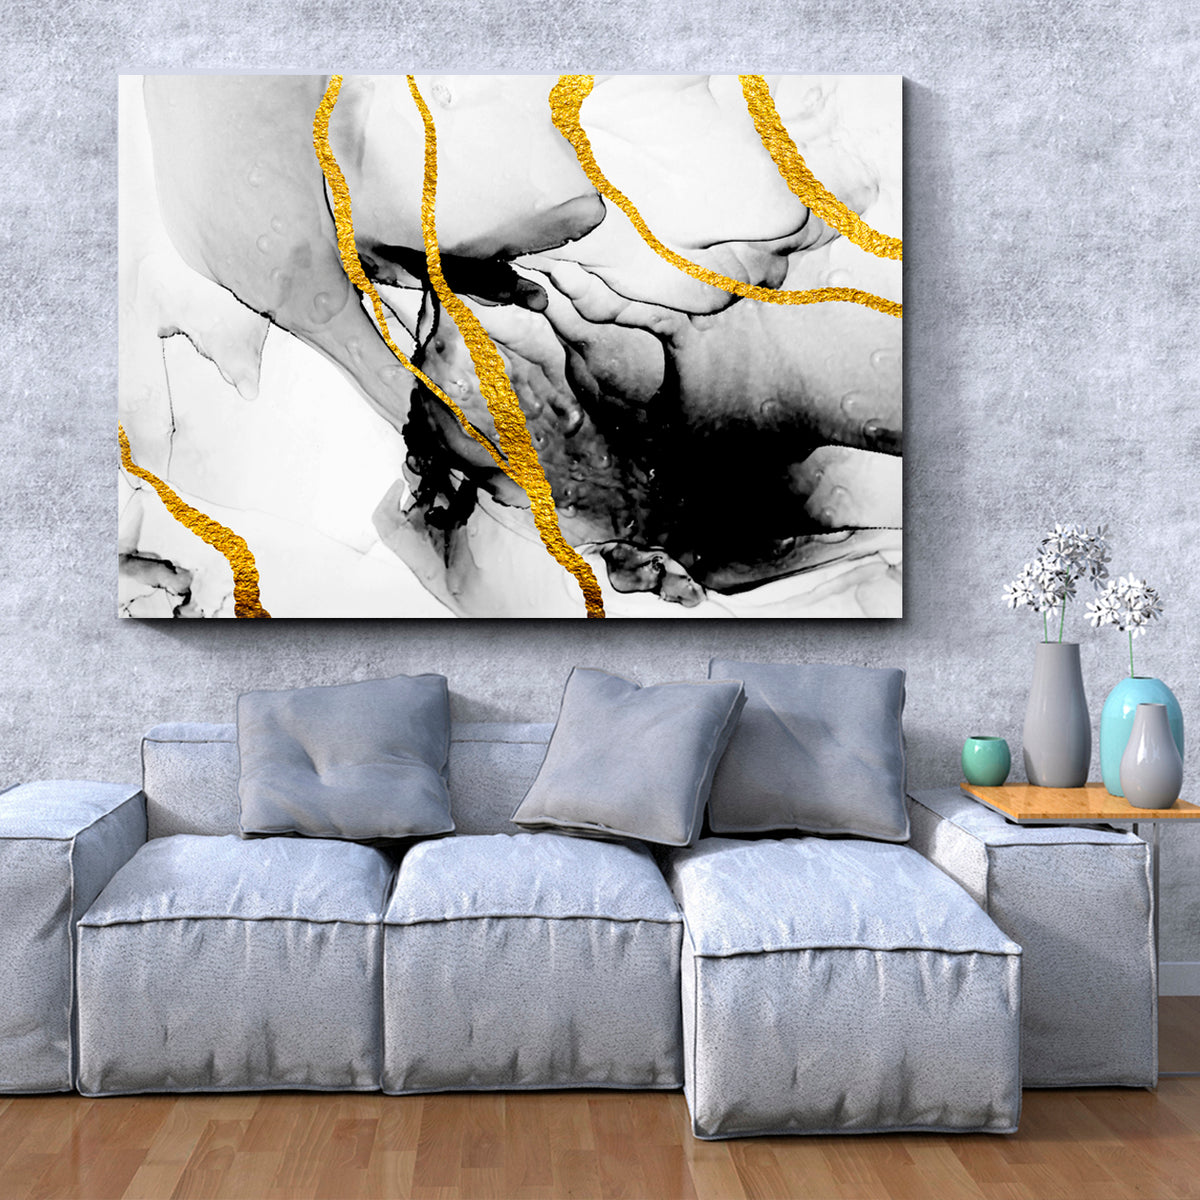 ABSTRACT CLOUDS ART & INK Black White Gold Marble Fluid Art, Oriental Marbling Canvas Print Artesty 1 panel 24" x 16" 